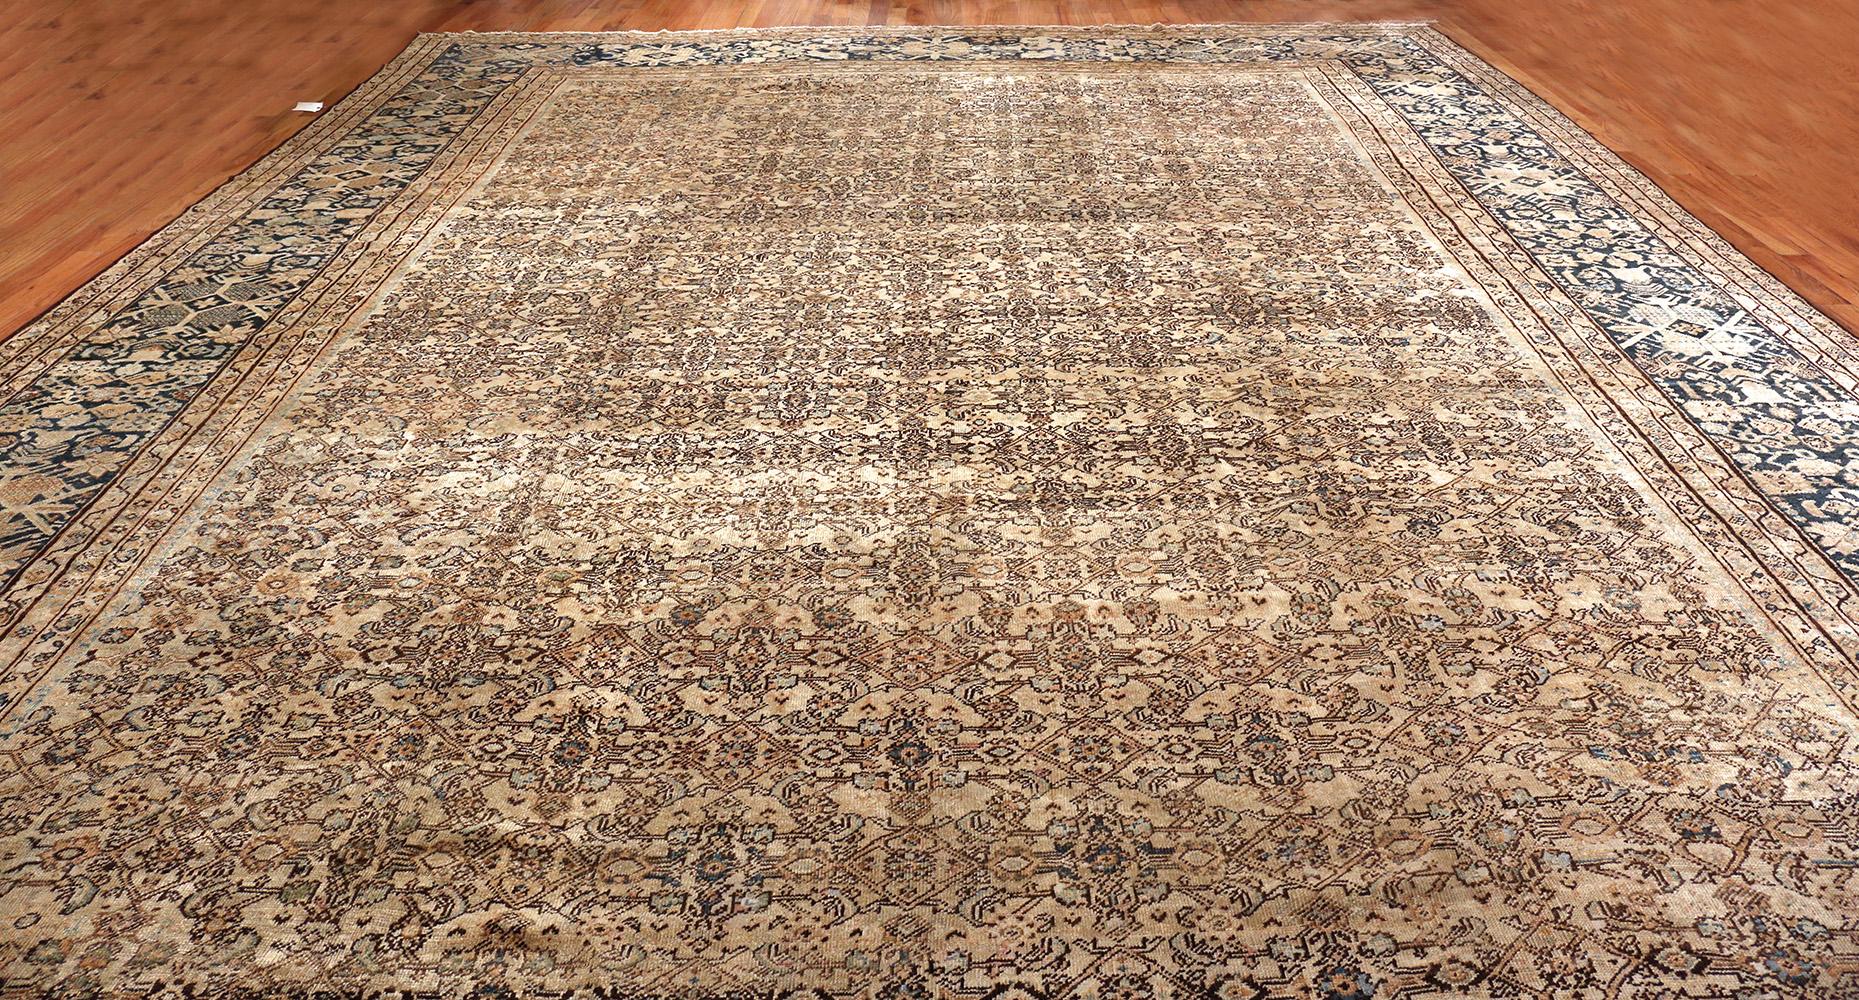 Large Oversize Antique Persian Sultanabad Rug. Size: 14 ft 6 in x 22 ft 4